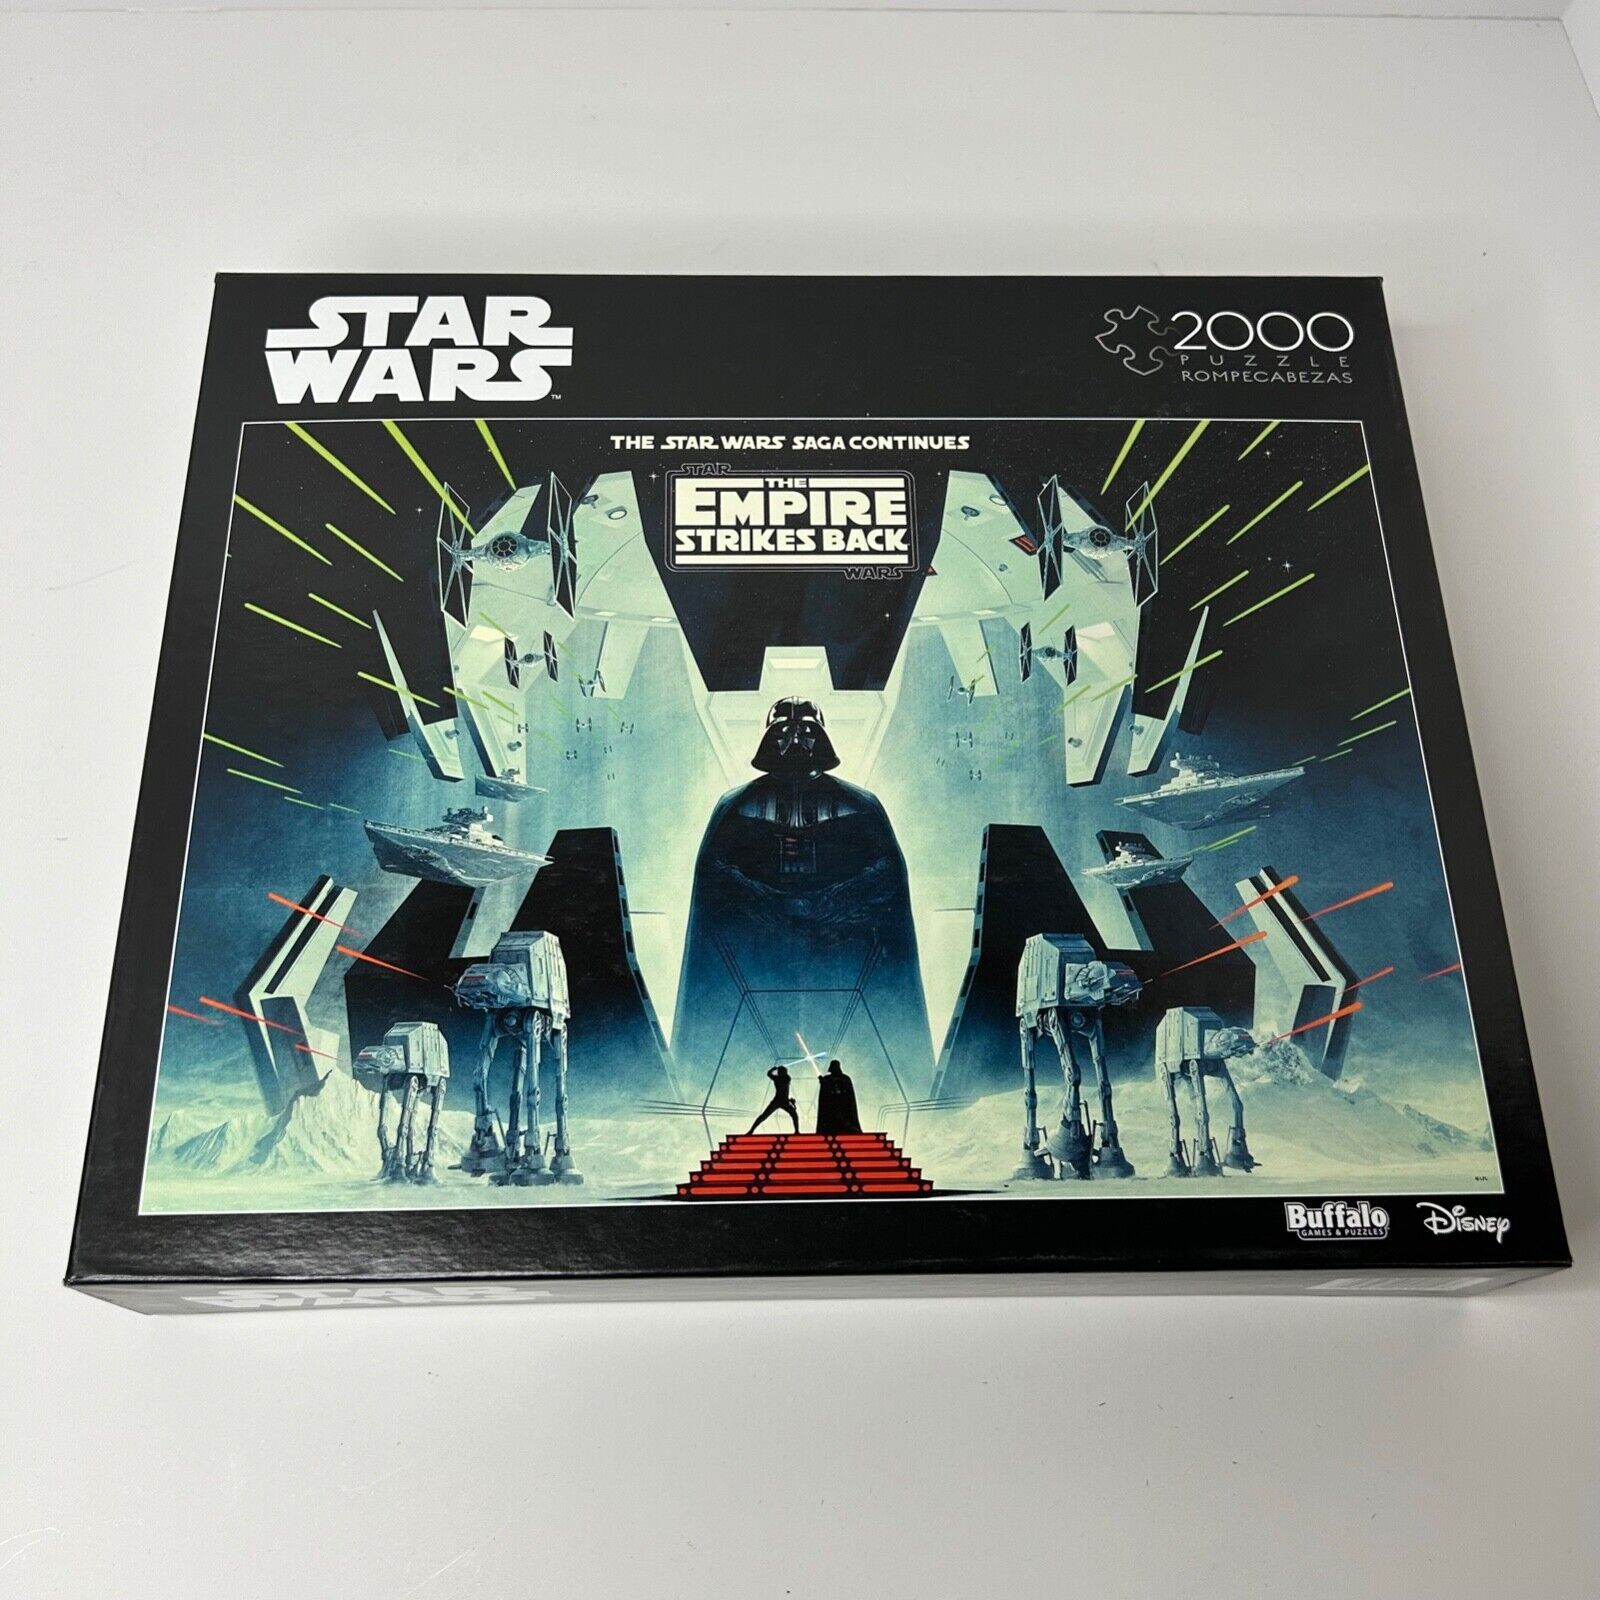 Star Wars The Saga Continues Empire Strikes Back 2000 Piece Jigsaw Puzzle NEW - $18.73